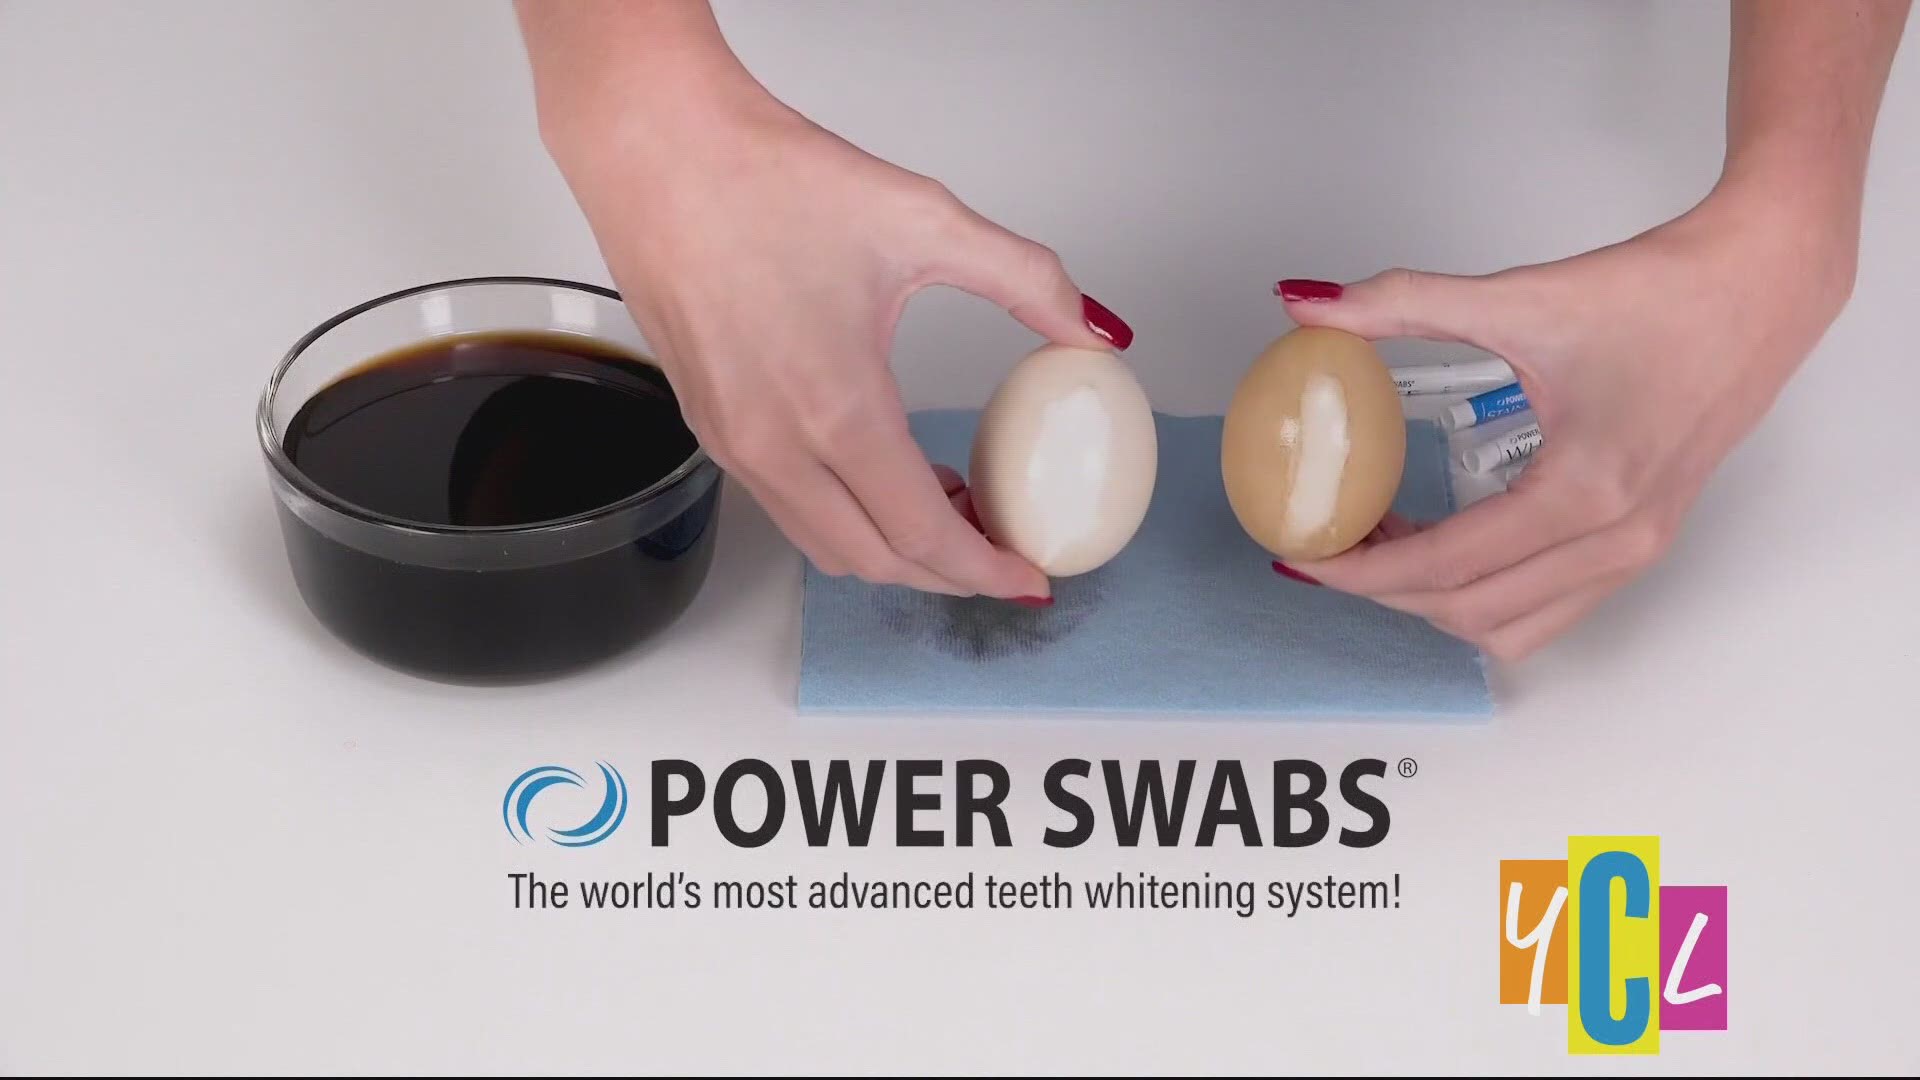 Power Swabs can help you brighten your smile throughout the year. The following is a paid segment sponsored by True Earth Health Solutions.